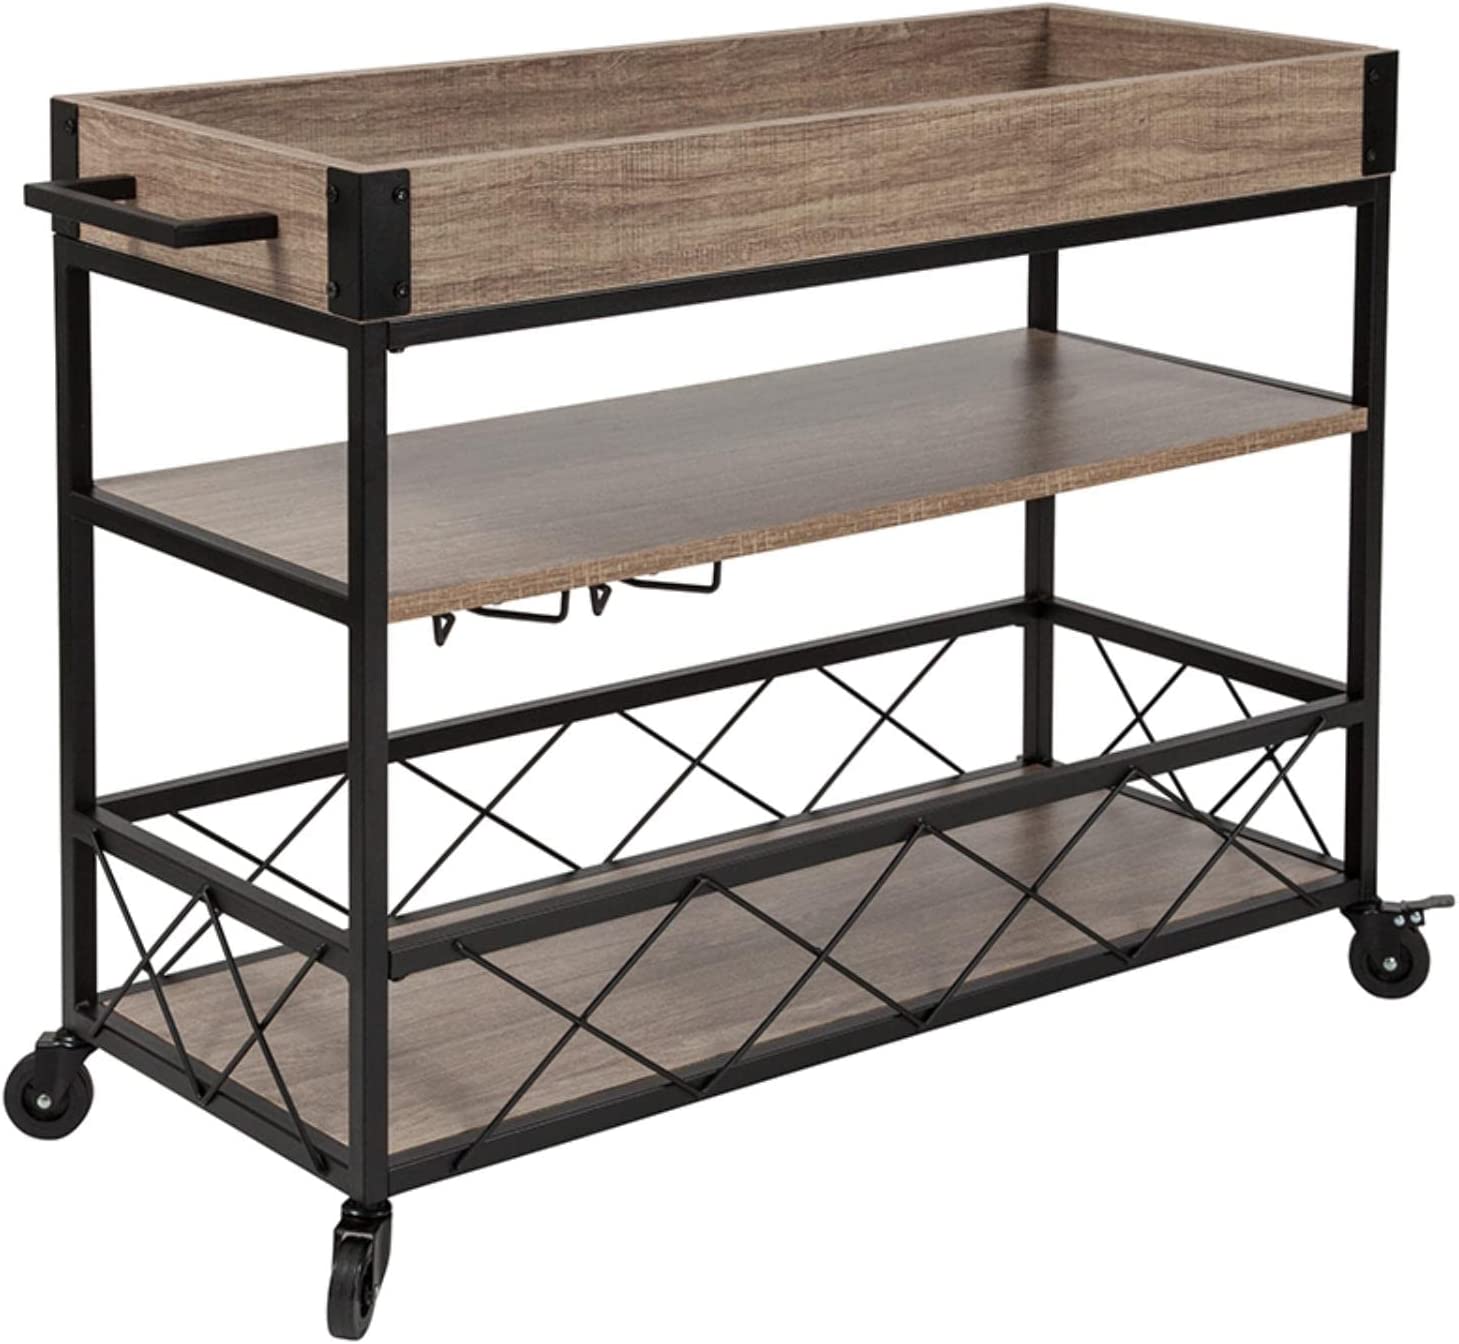 Flash Furniture NAN-JH-17105-GG Buckhead Distressed Light Oak Wood and Iron Kitchen Serving and Bar Cart with Wine Glass Holders